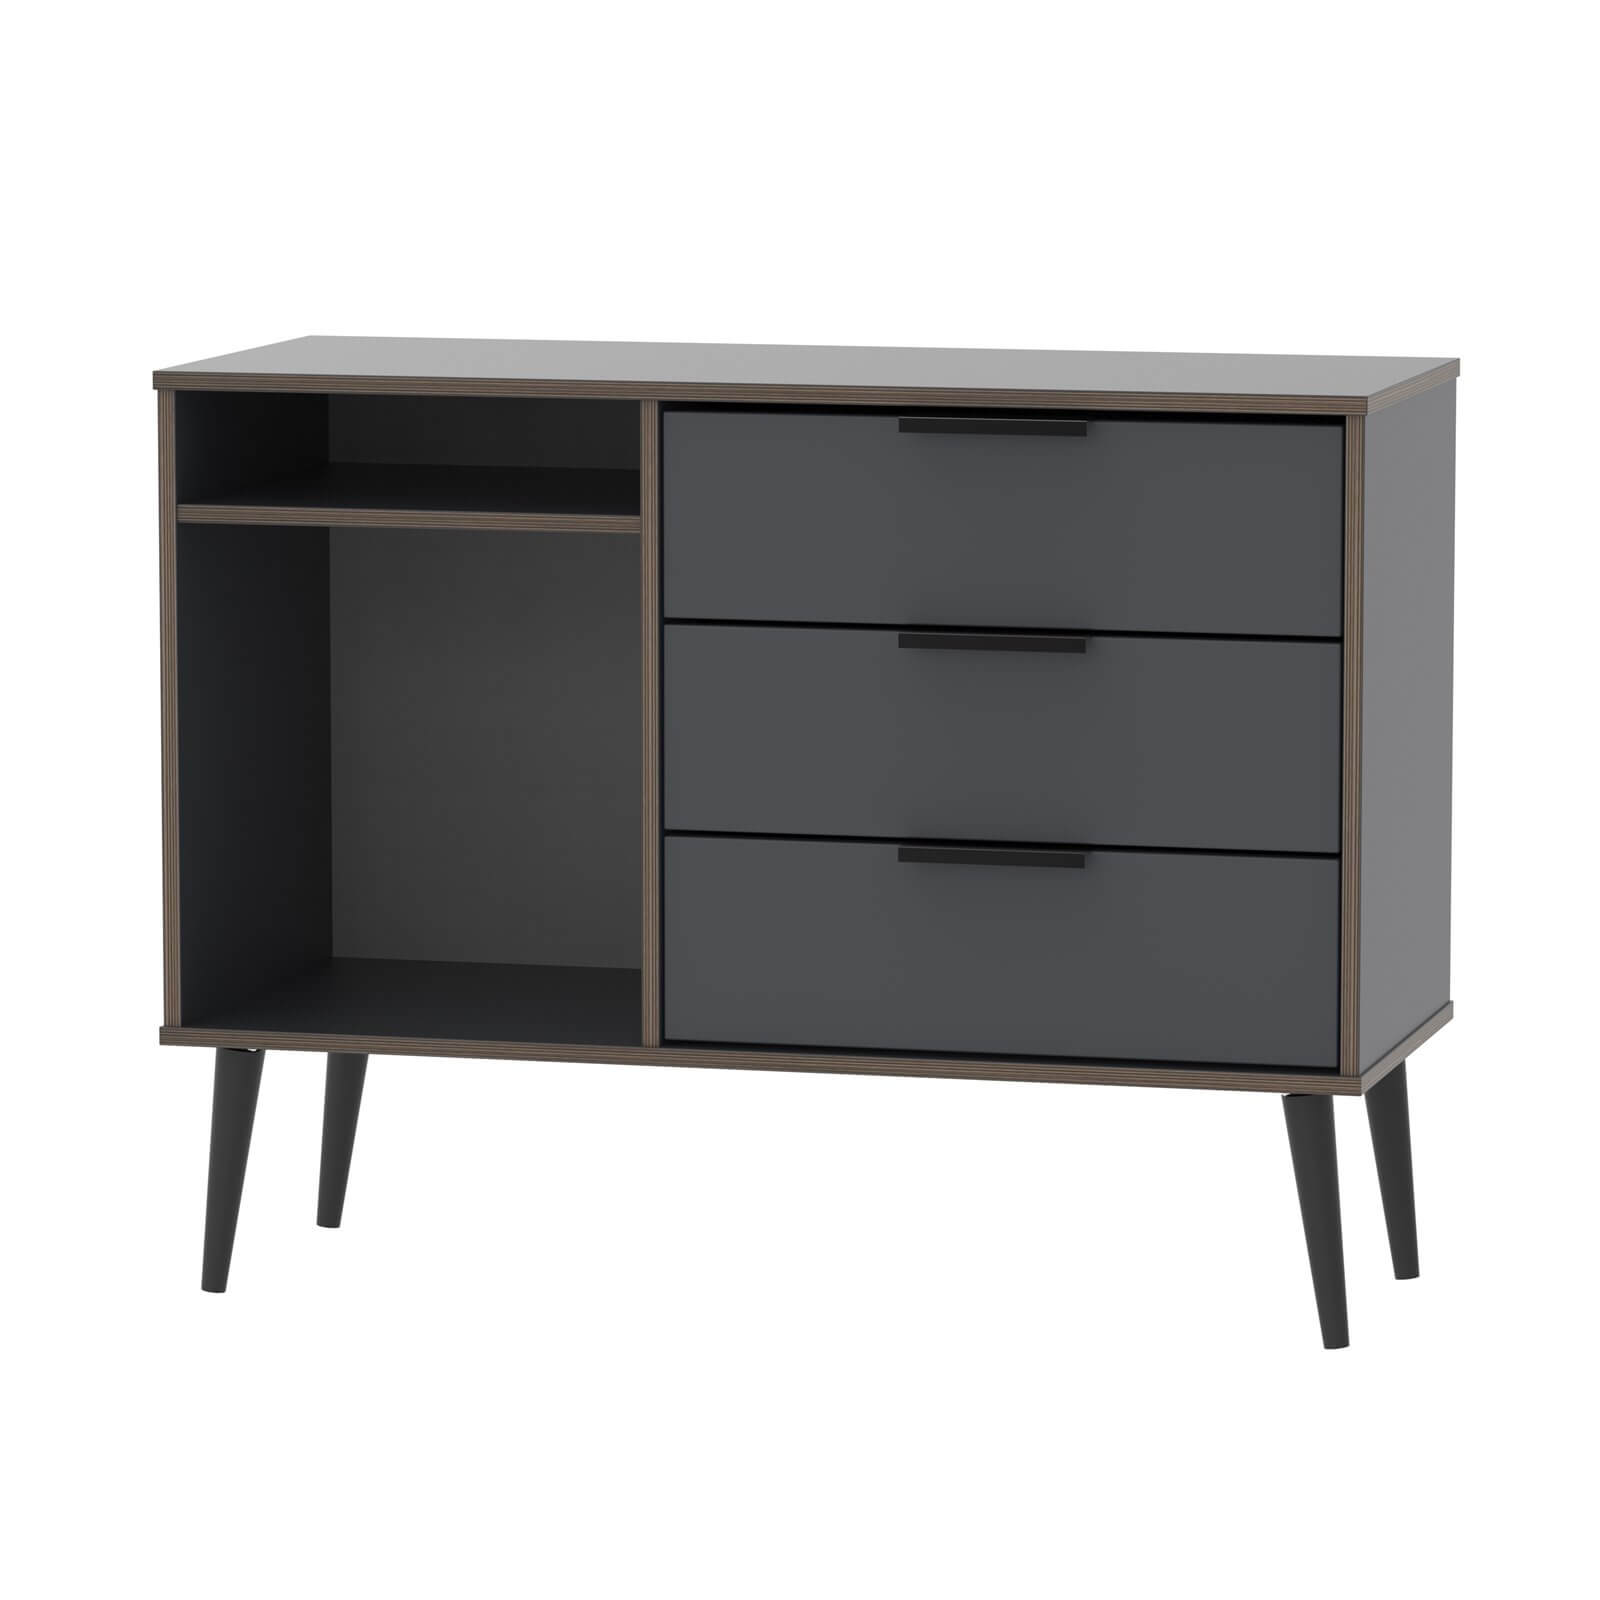 Tokyo 3 Drawer TV Unit with Legs - Graphite